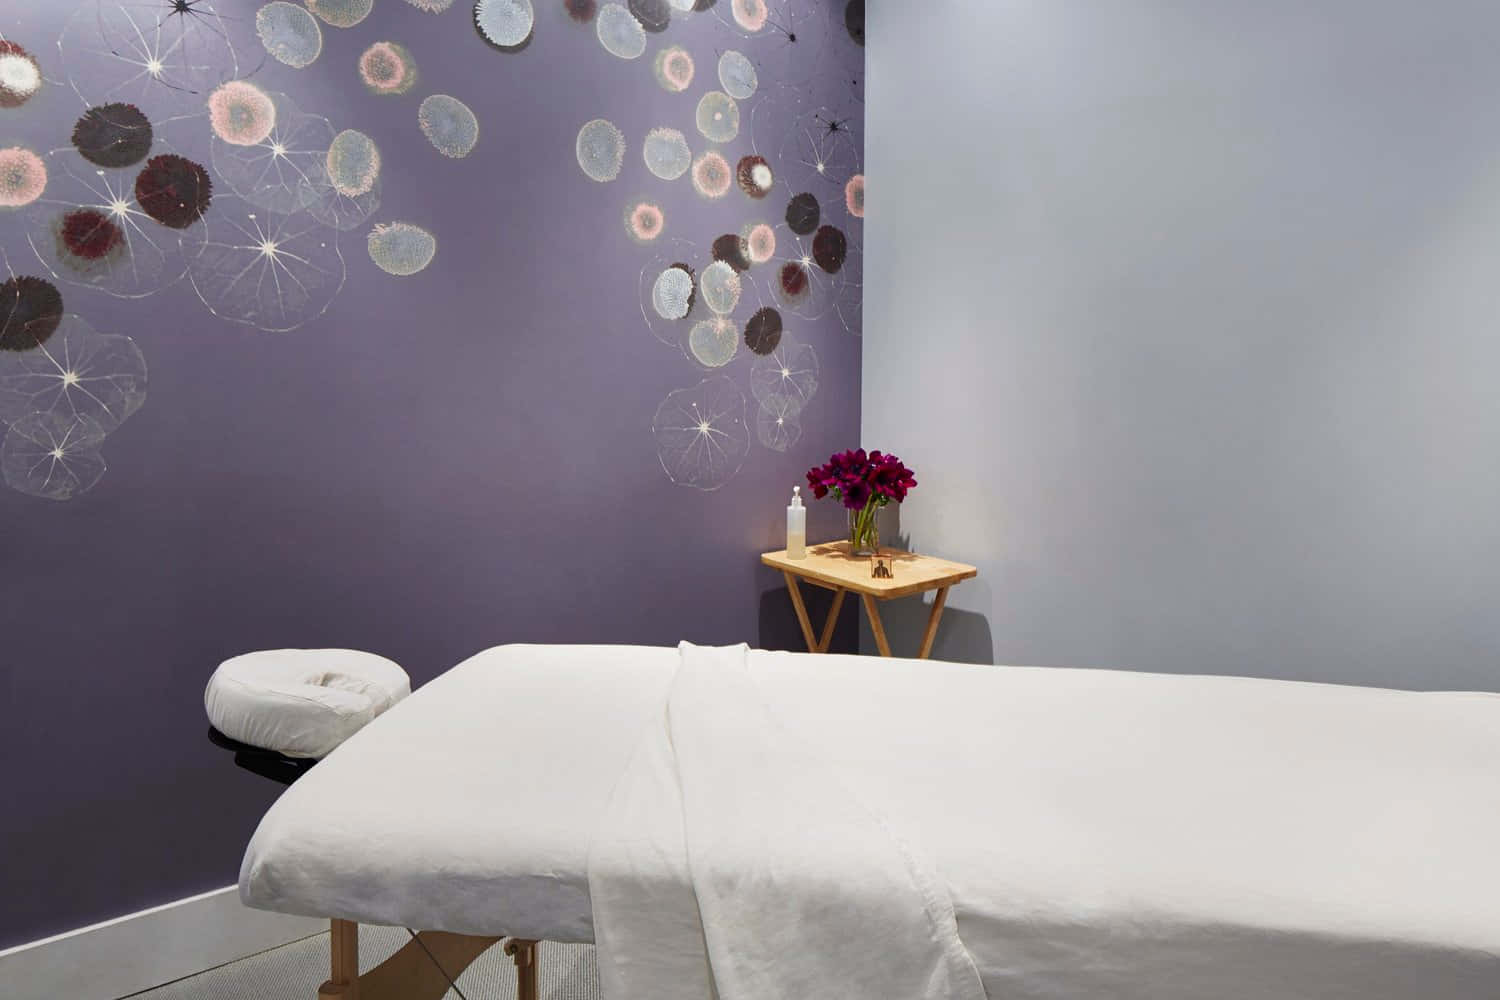 A Massage Room With Purple Walls And A White Bed